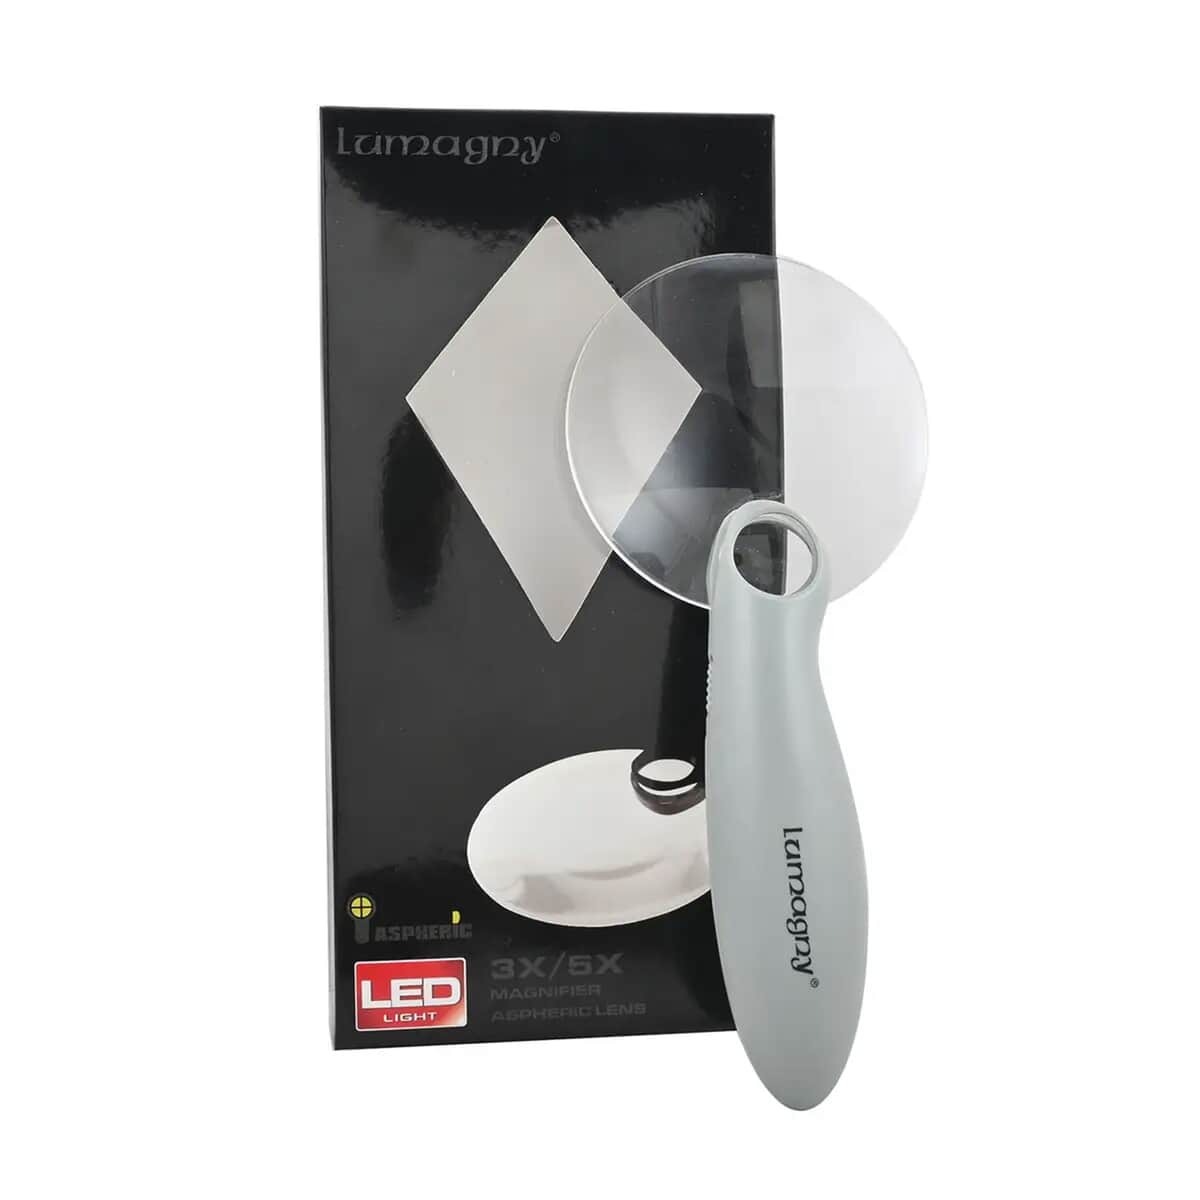 Lumagny Handheld Magnifier with Light -Gray image number 0